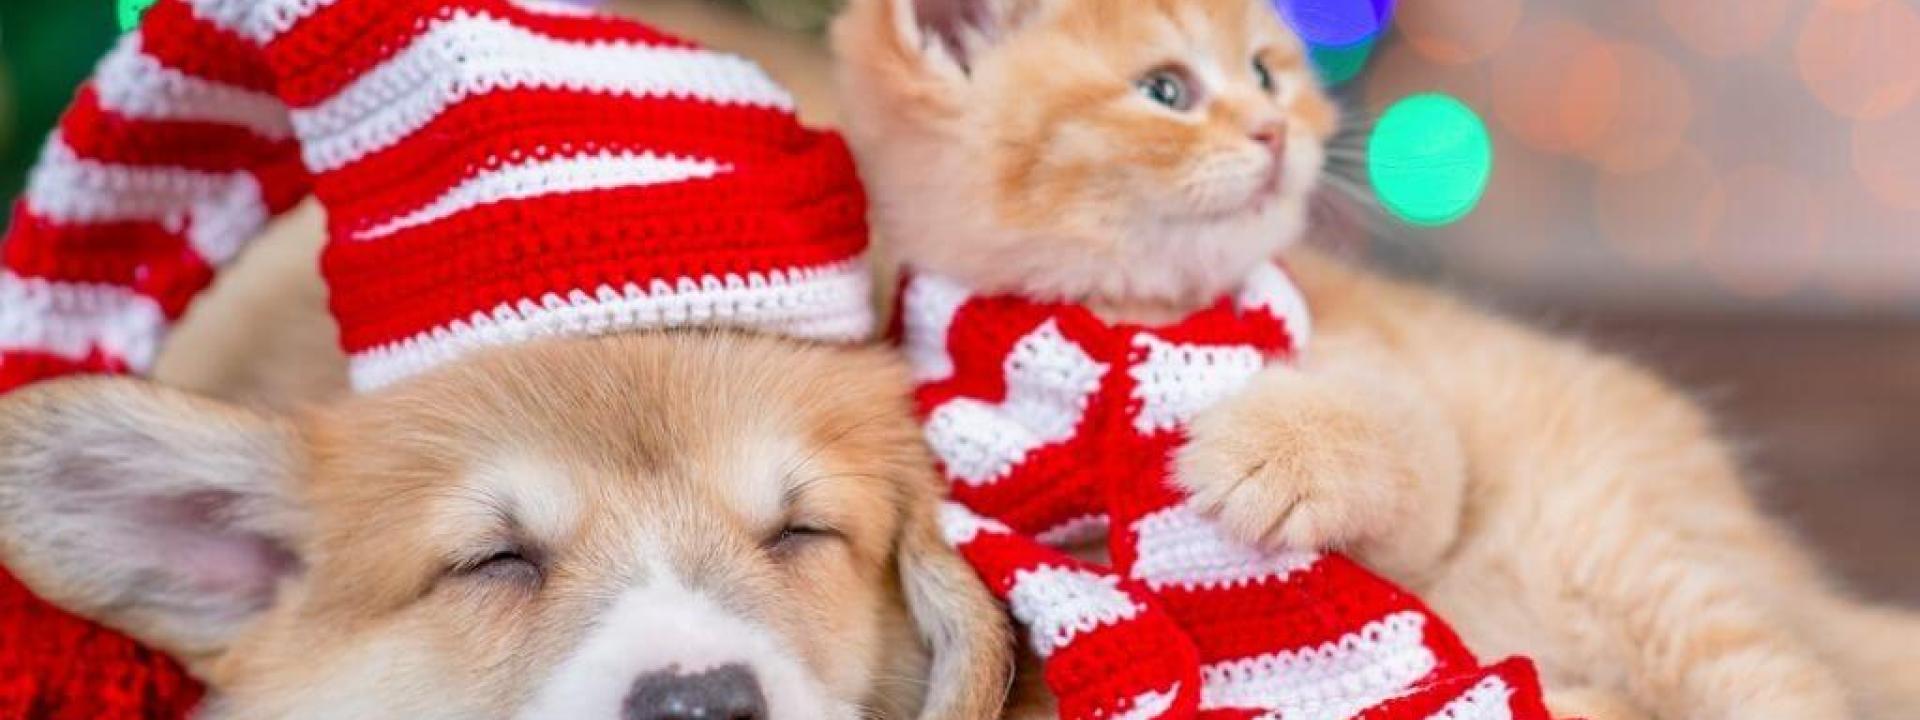 considerations before Christmas pets